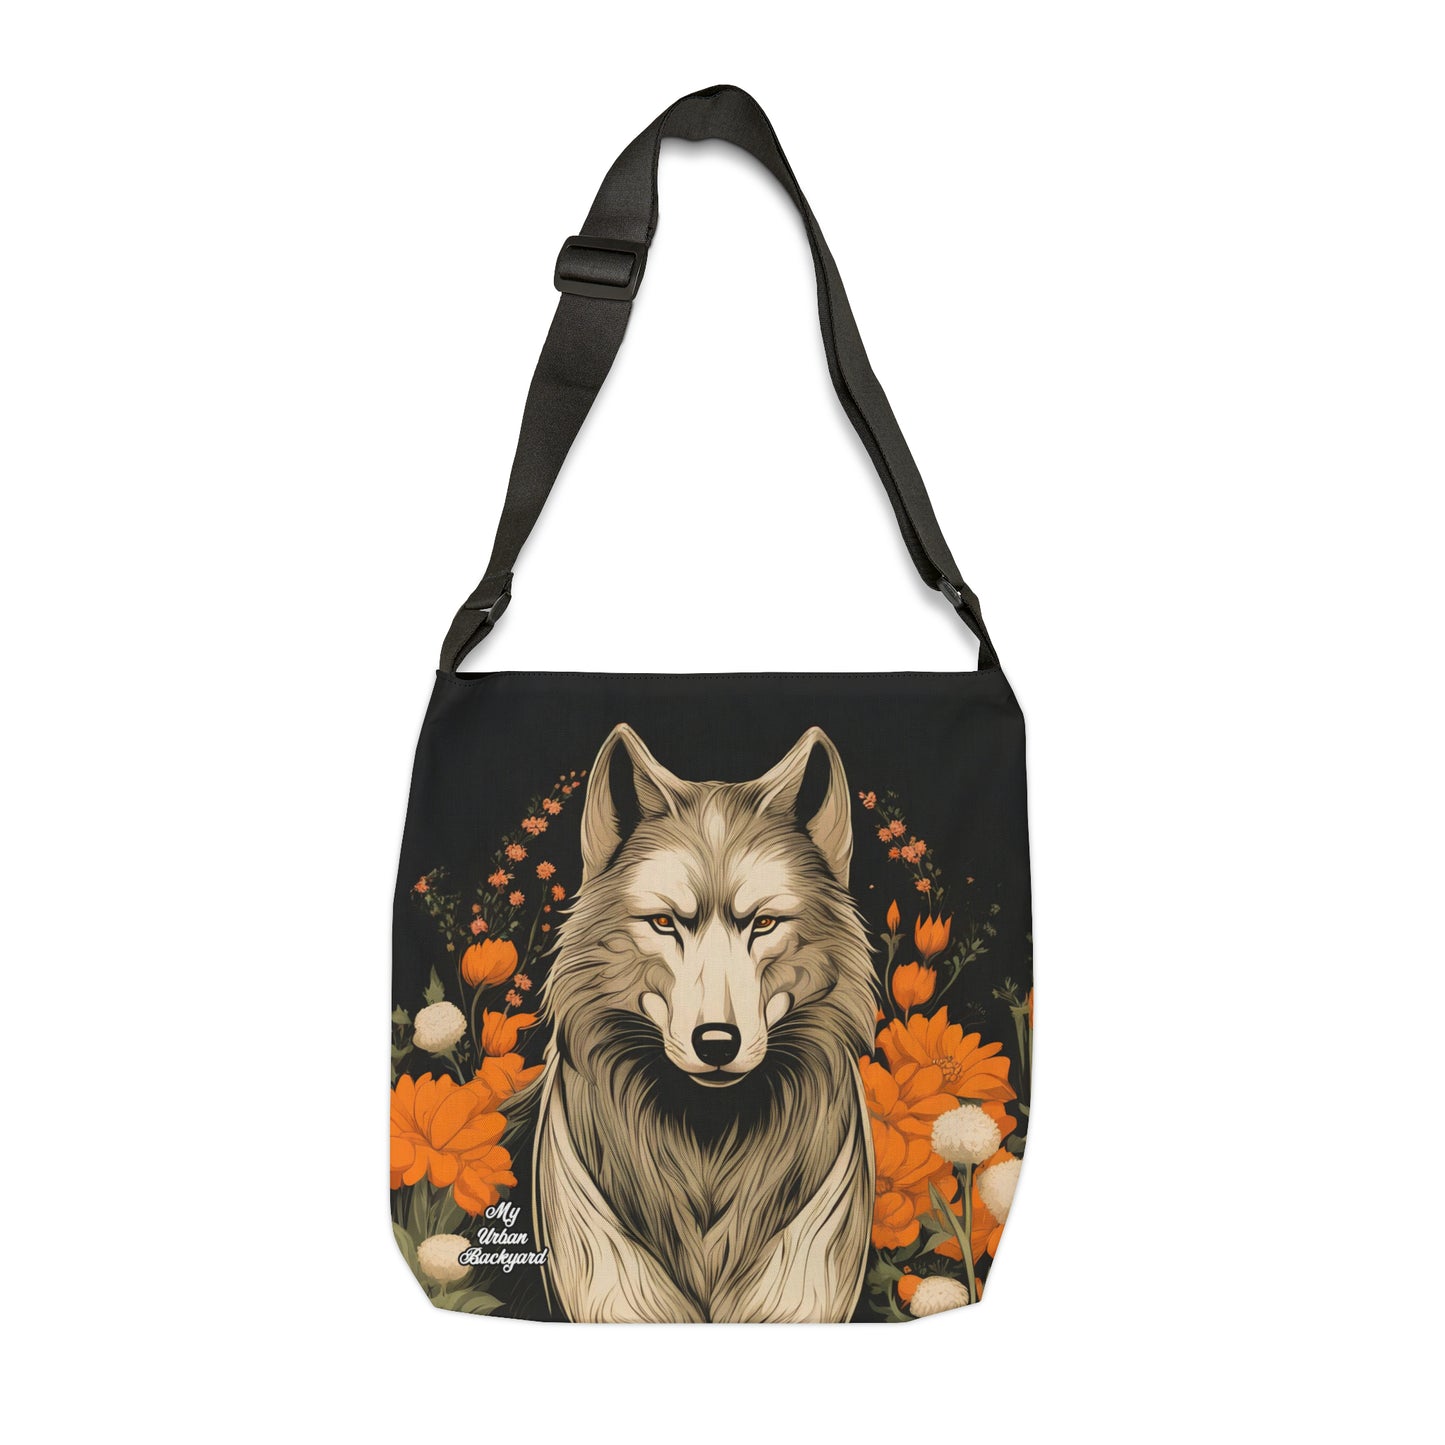 Wolf with Flowers, Tote Bag with Adjustable Strap - Trendy and Versatile